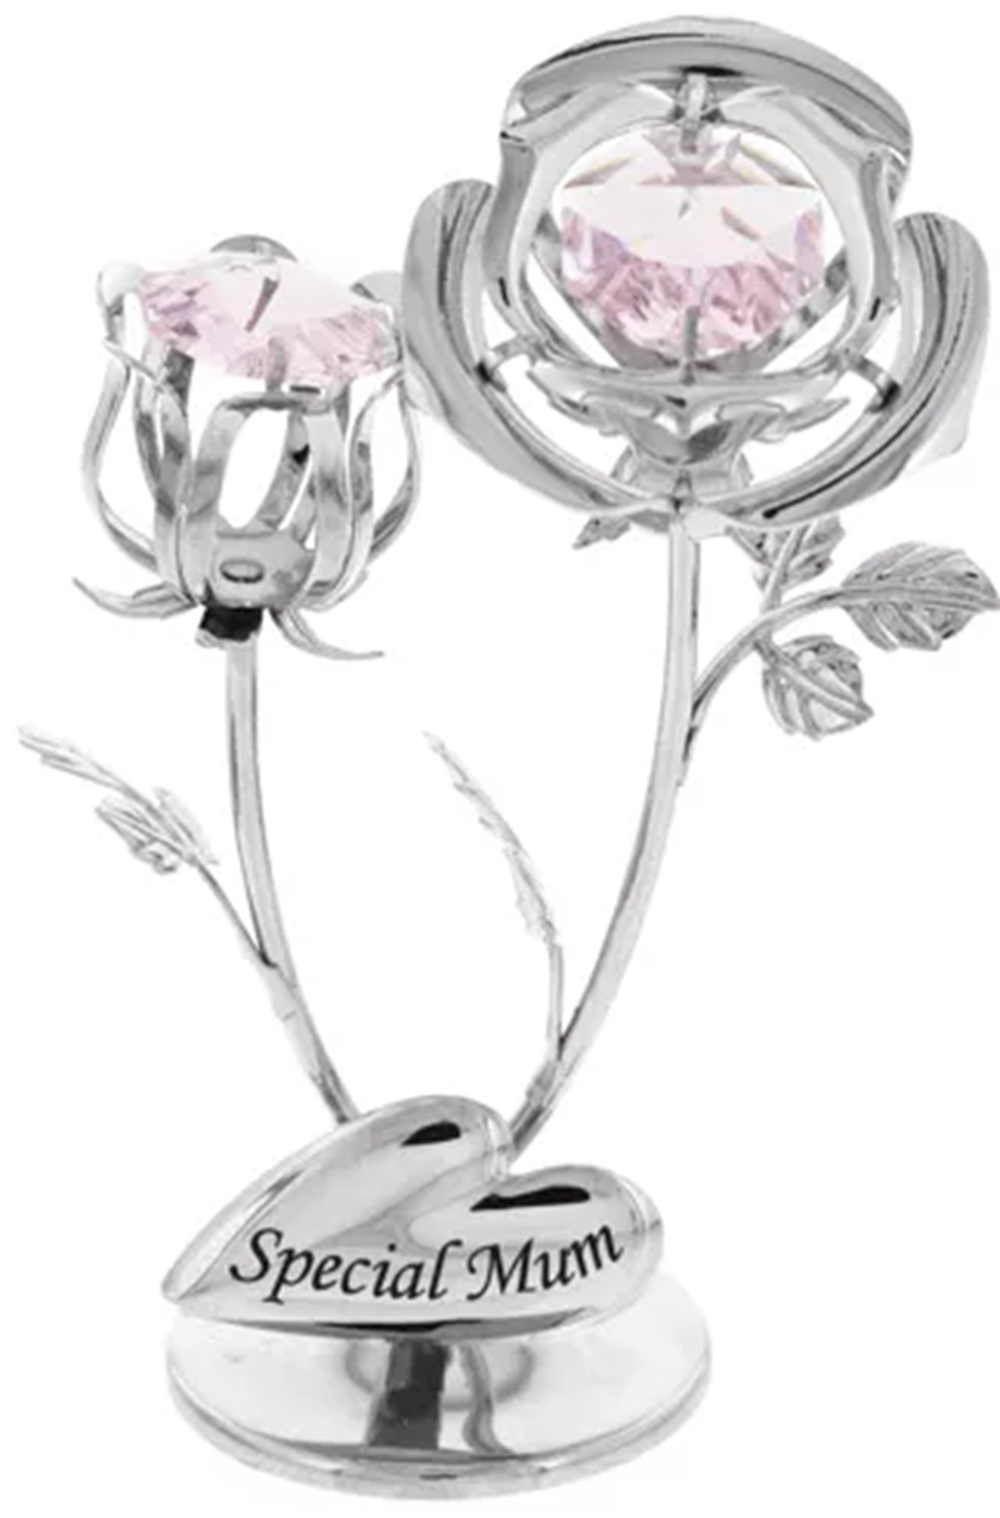 Crystocraft Chrome Plated Rose & Rose Bud Special Mum